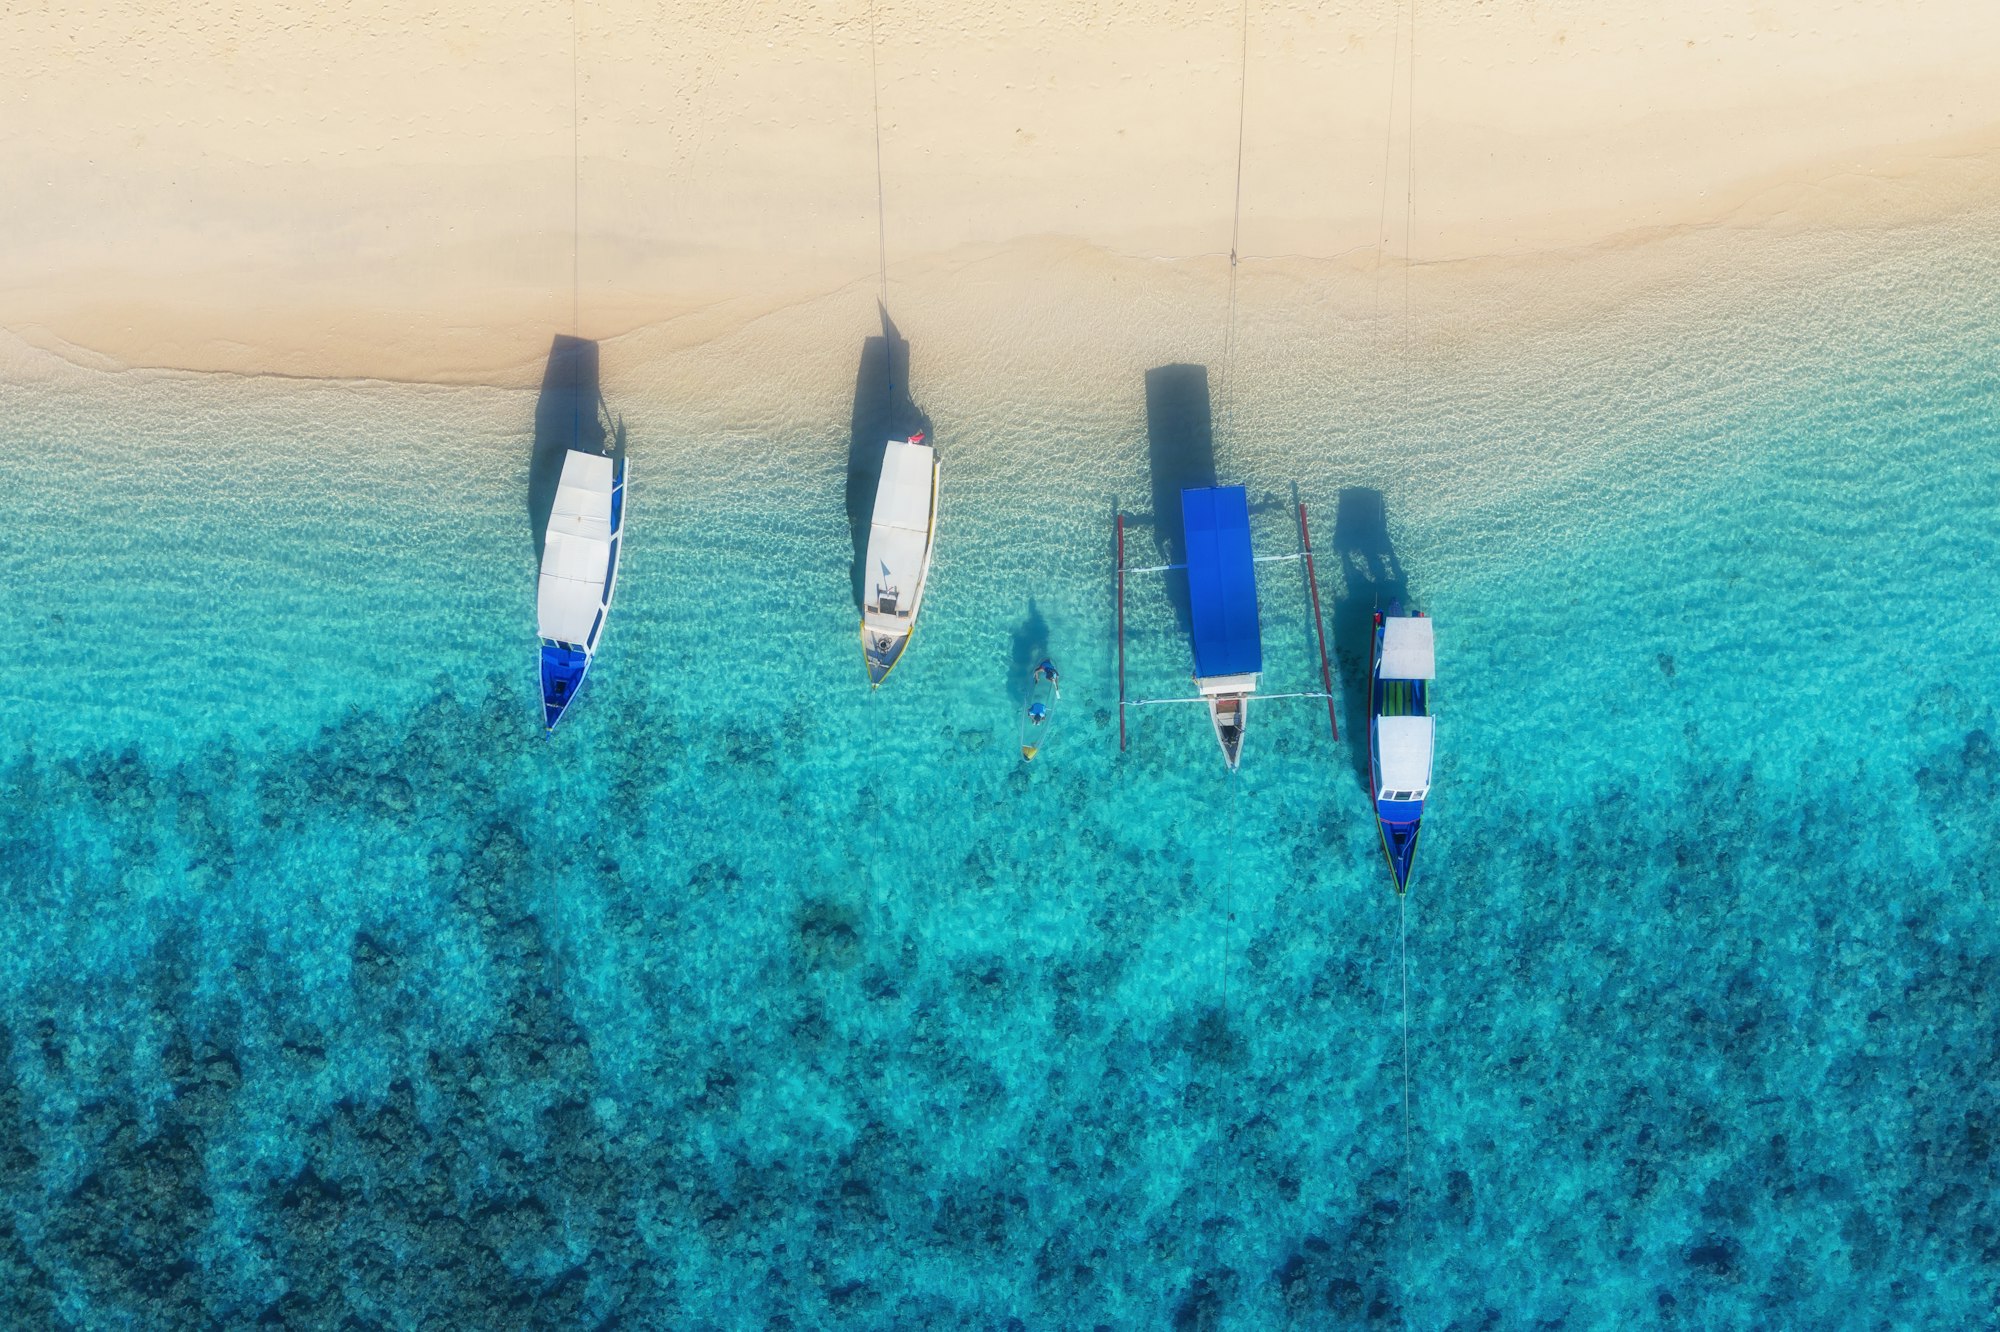 Boats near the beach. Blue water background from top view. Summer seascape